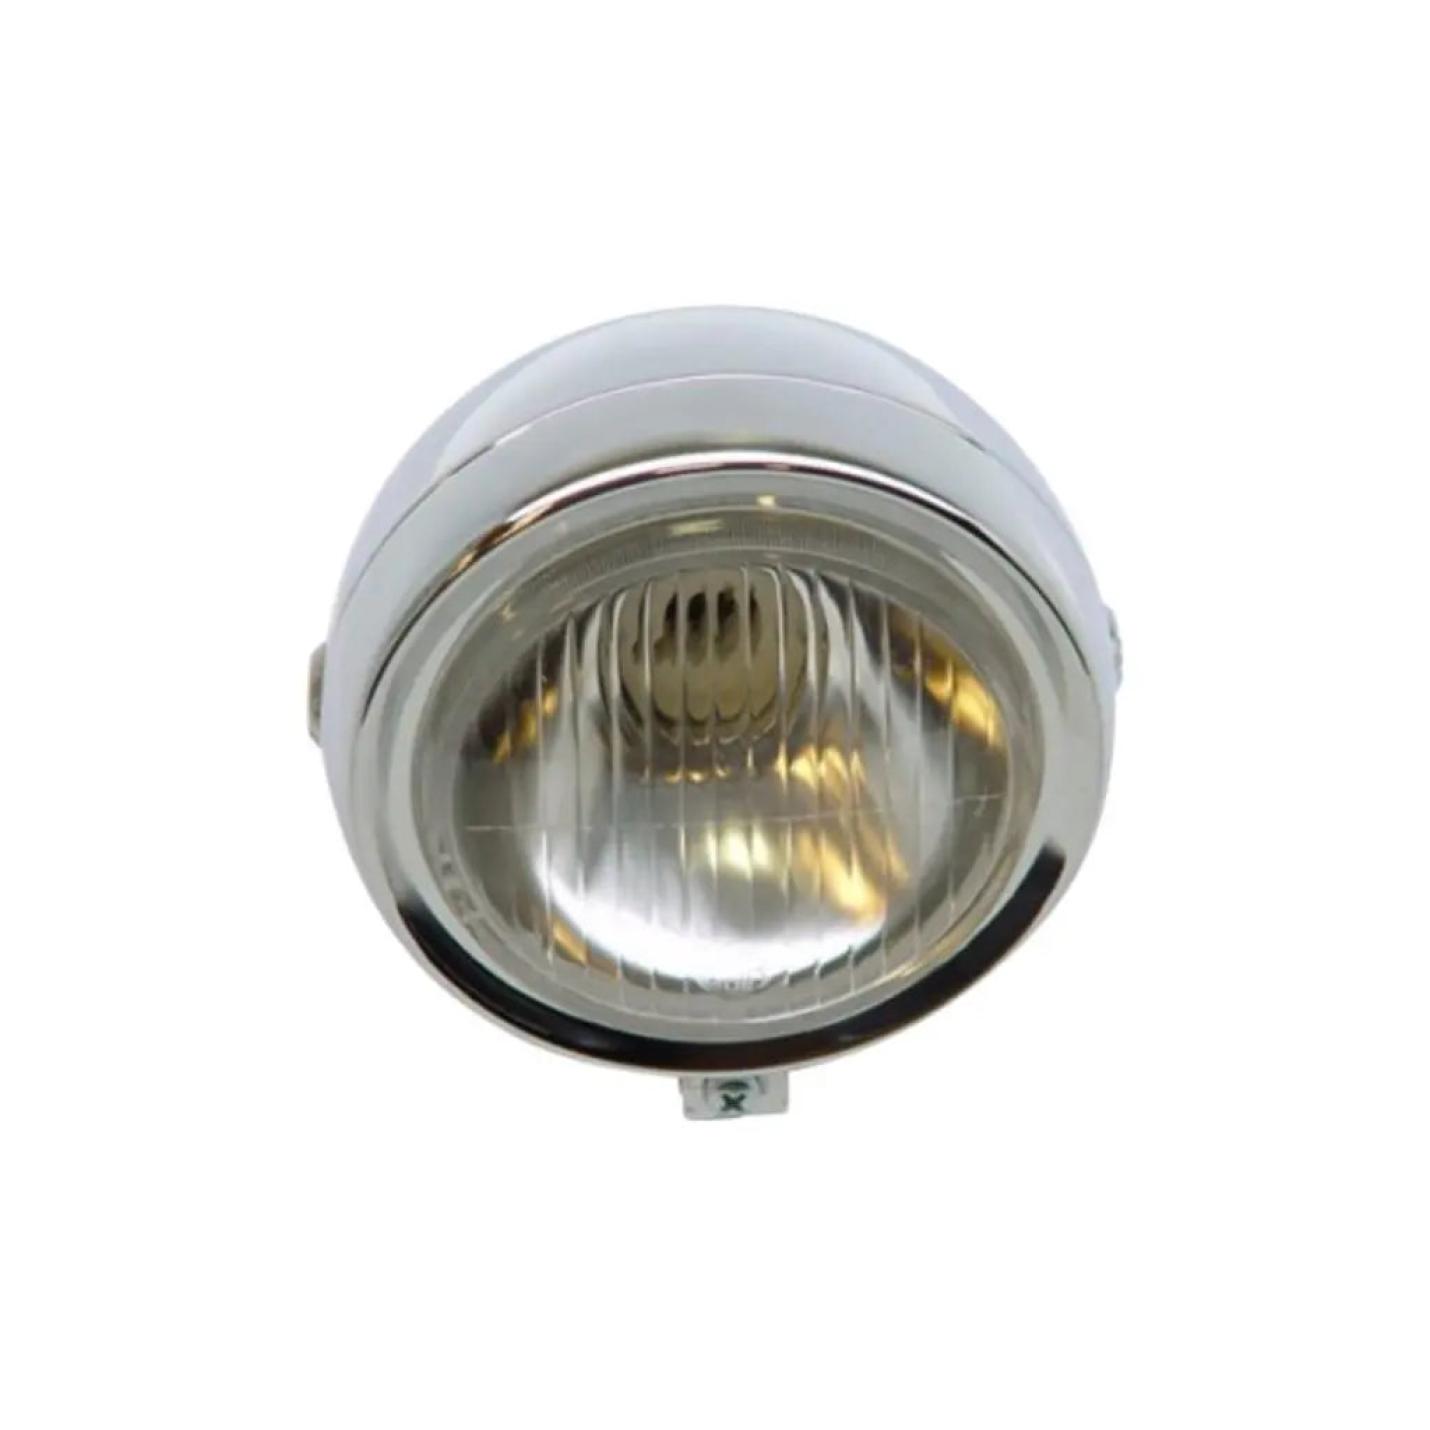 Koplamp Rond Chroom | Puch Maxi AE-trading